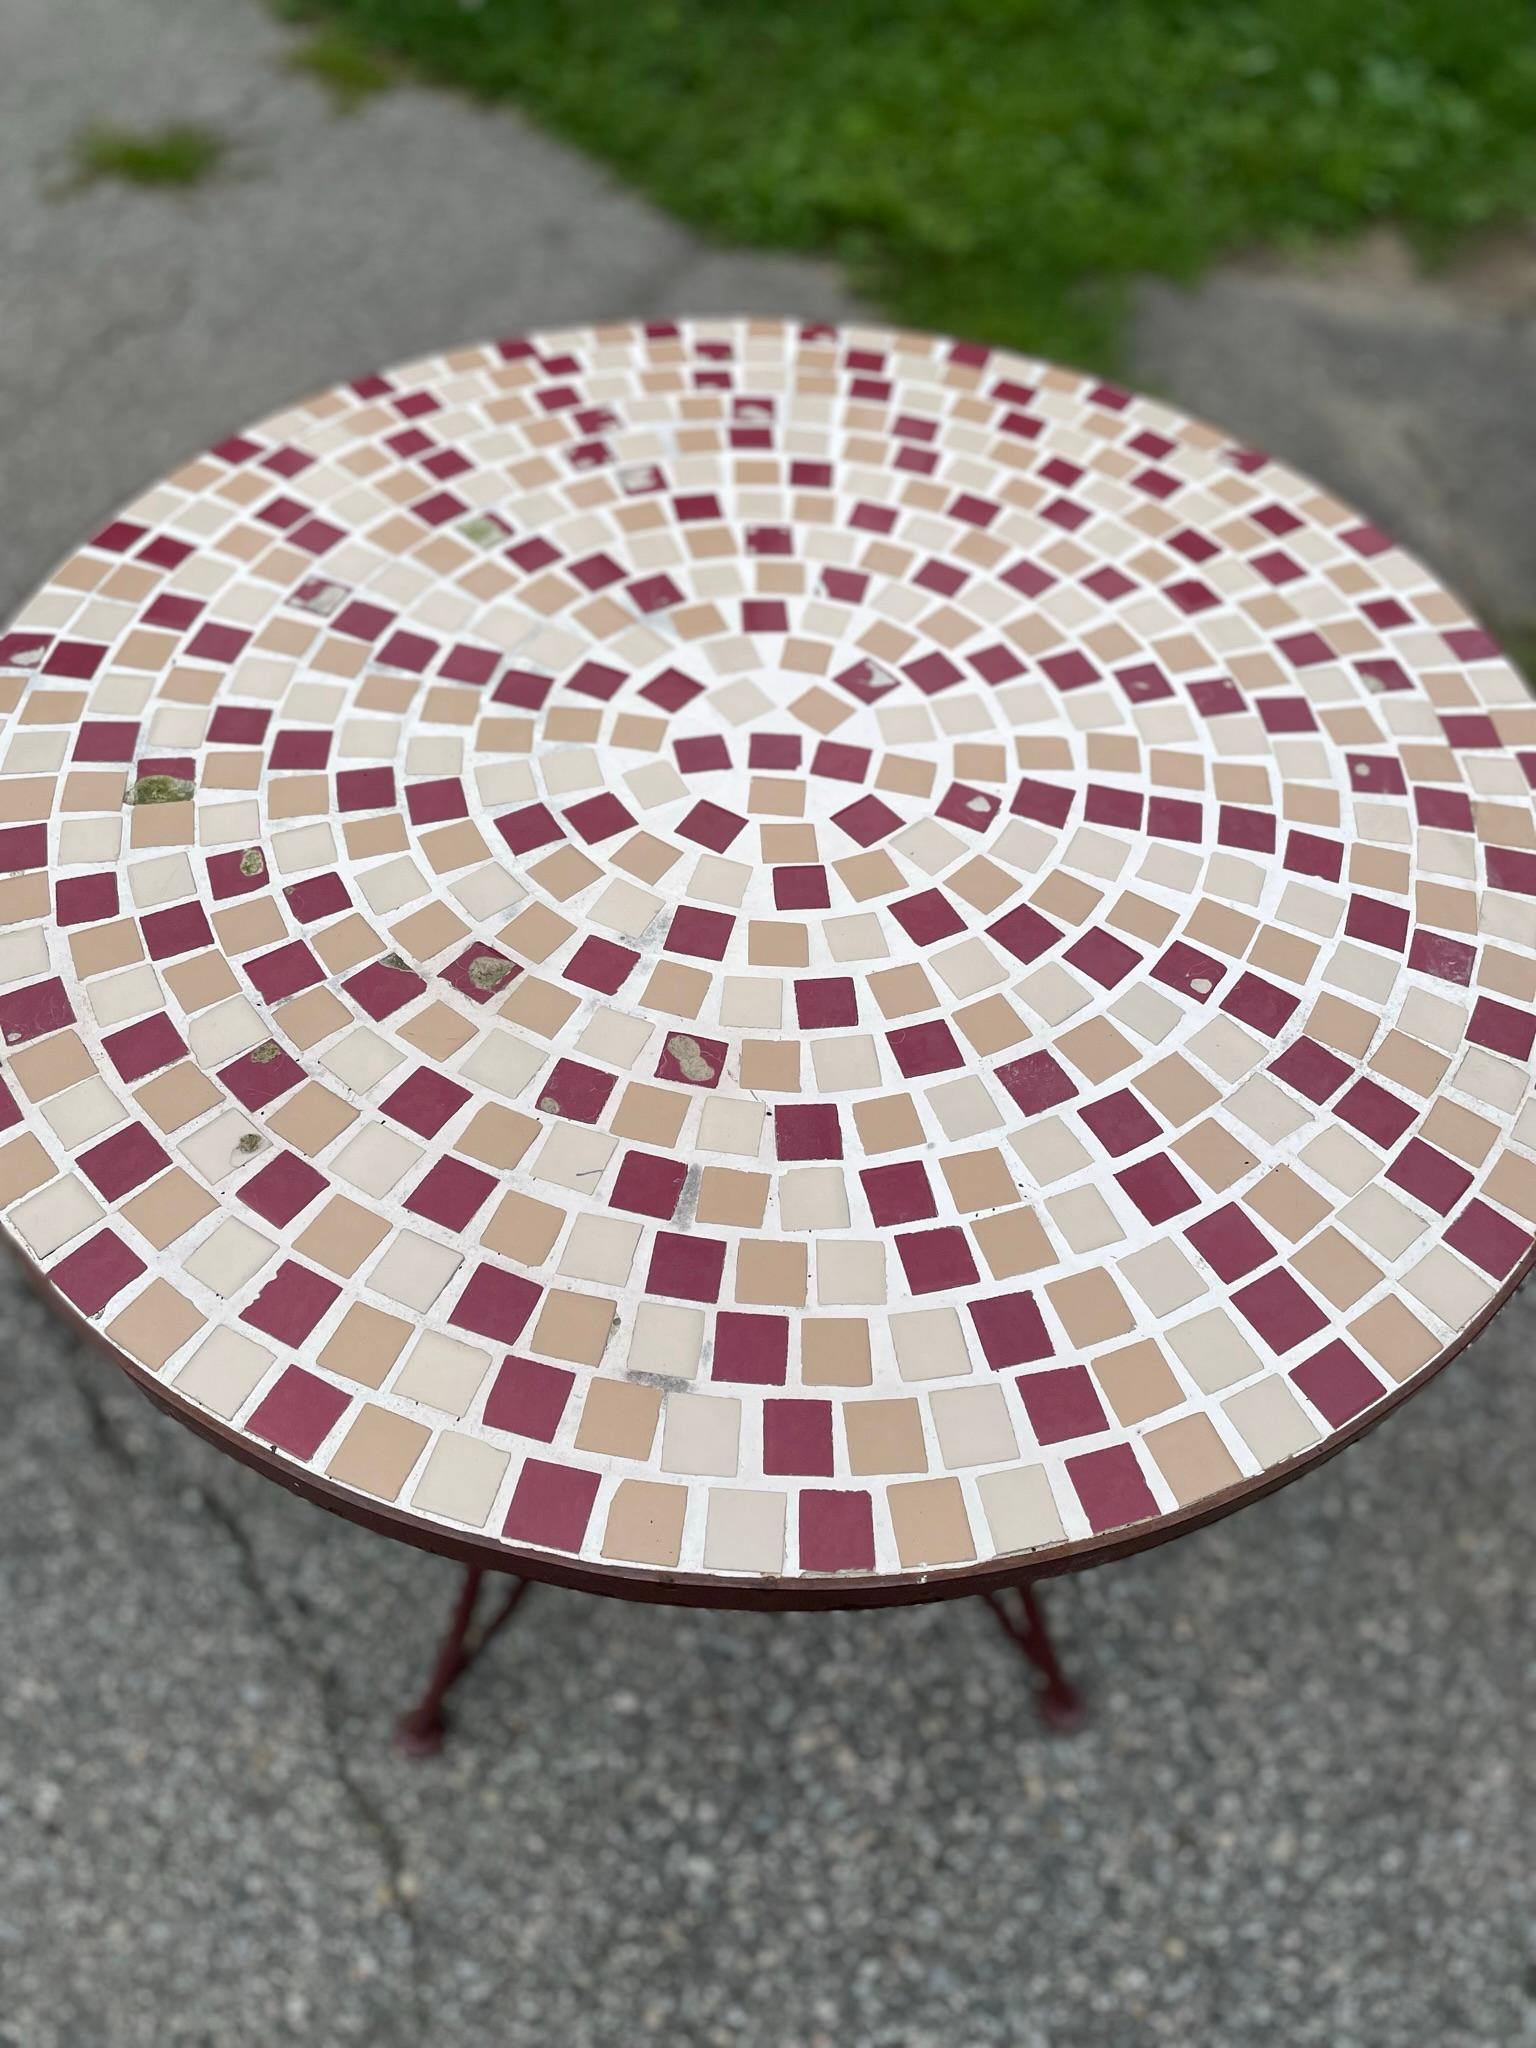 Vintage Mosaic a Tile Top Table

Perfect addition to any deck, garden, terrace, or patio. Suitable seating for 2 people. Wrought iron attached base.

Delivery within 2 weeks for the east coast states with standard flat rate shipping of 329